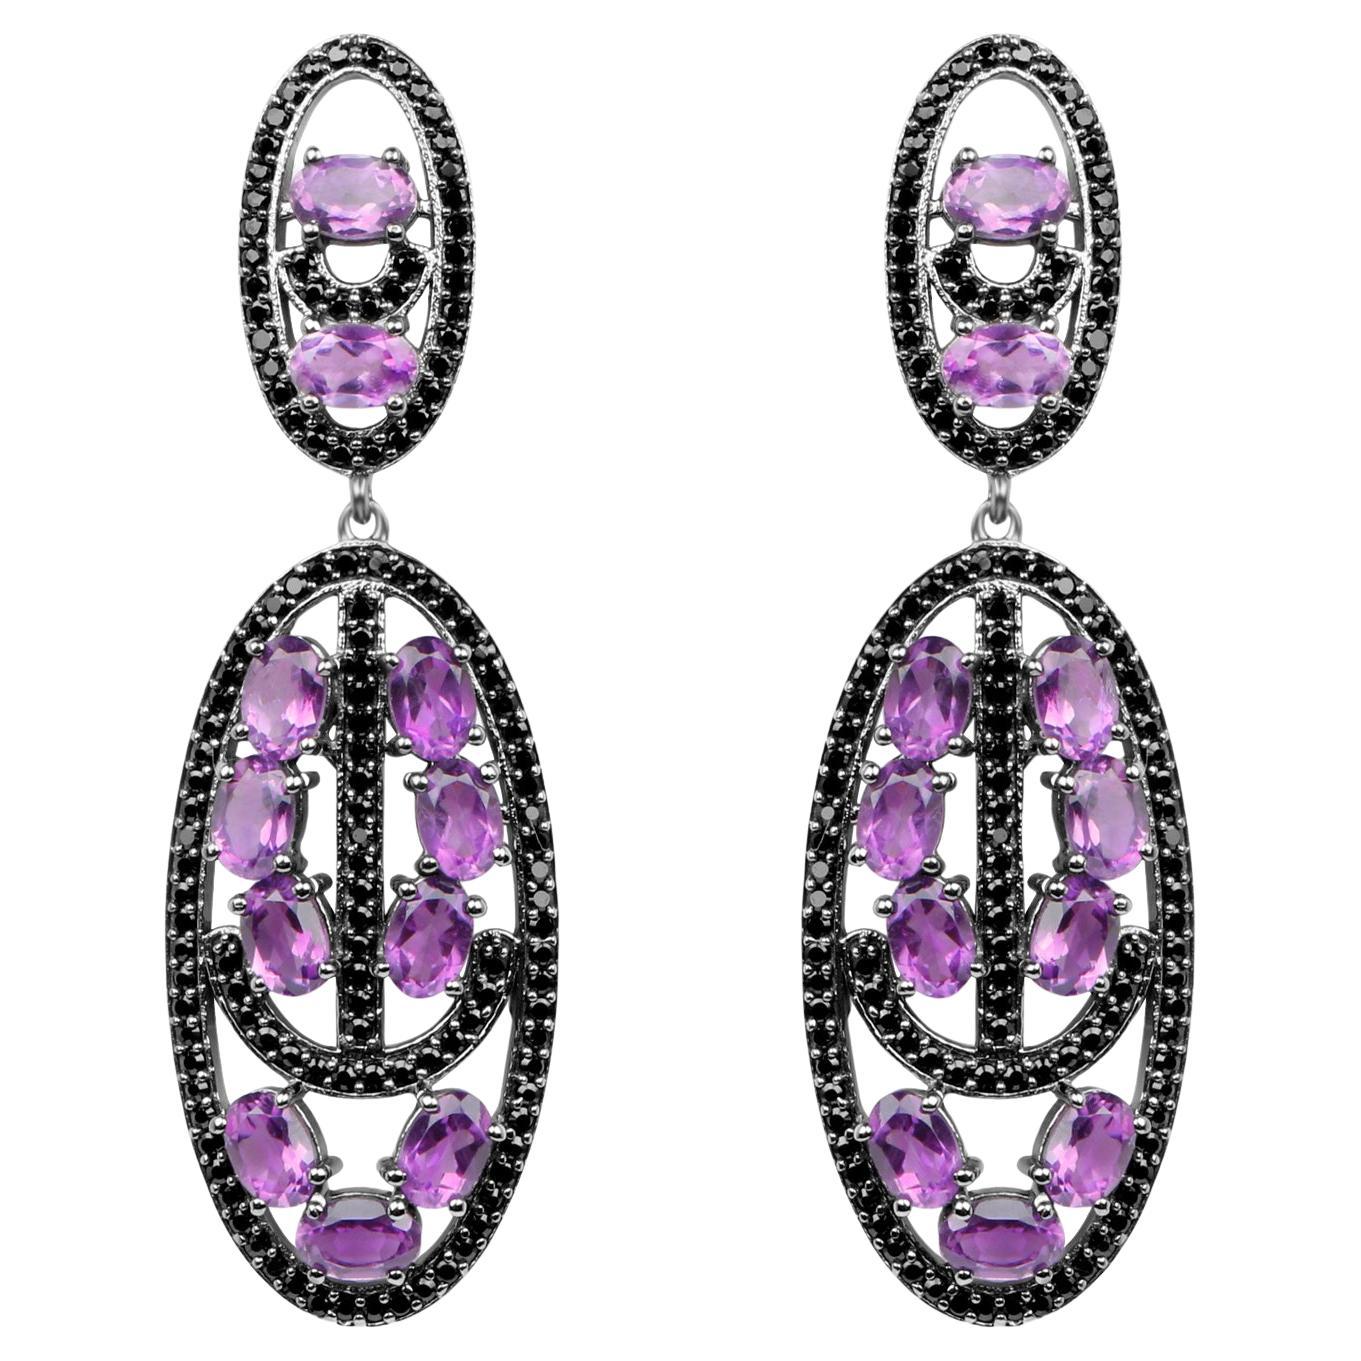 Amethyst Earrings With Black Spinels 12.45 Carats Rhodium Plated Sterling Silver